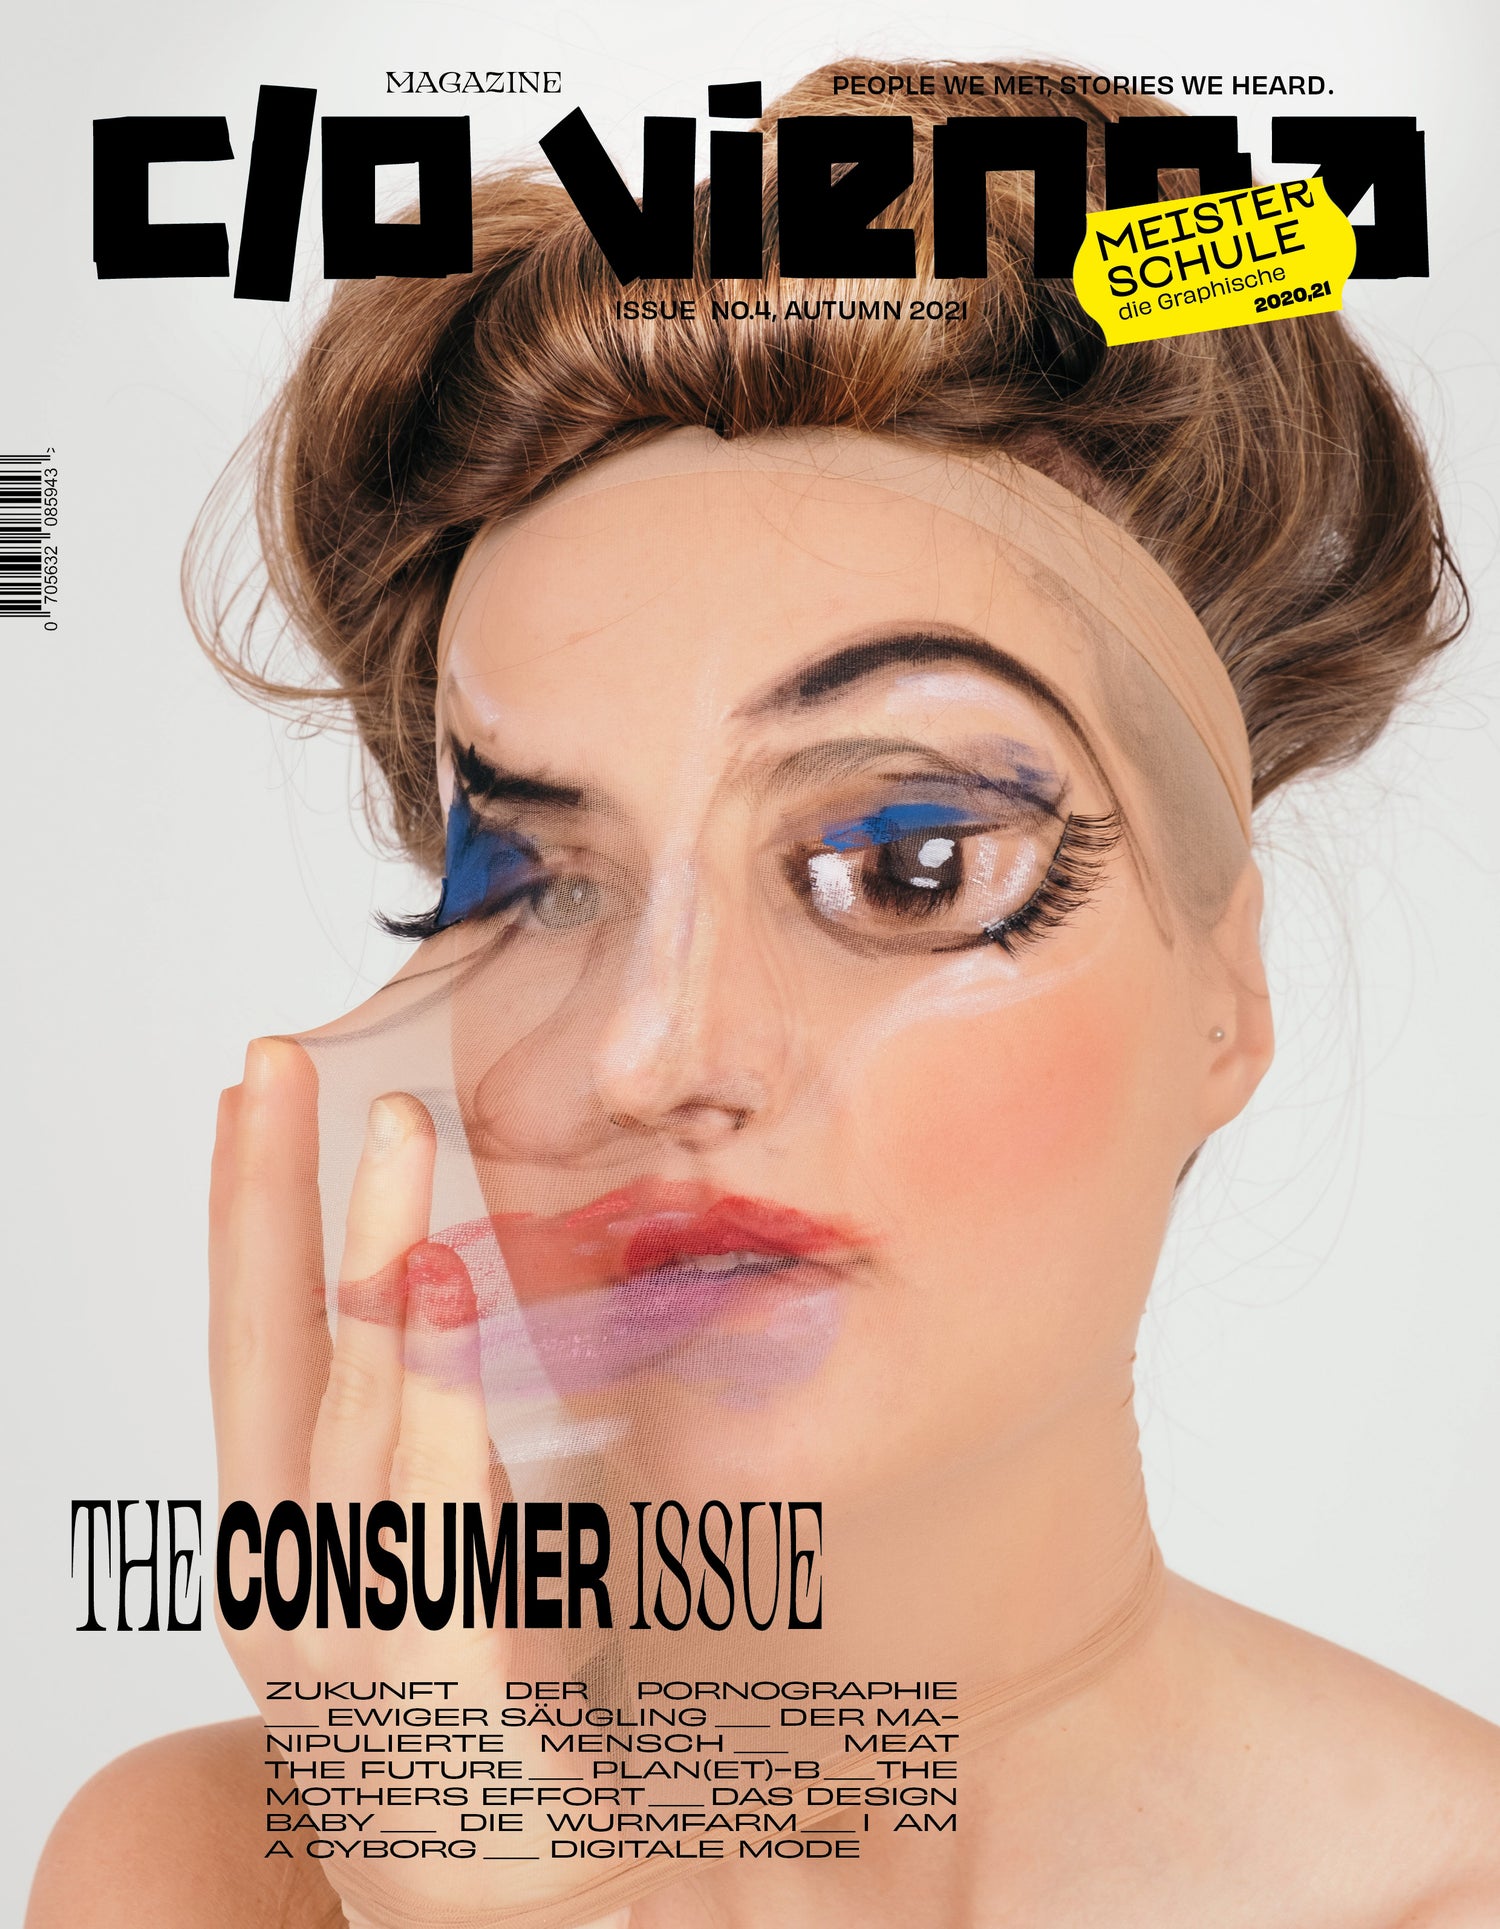 c/o vienna consumer issue cover. by meisterschule wien 2020